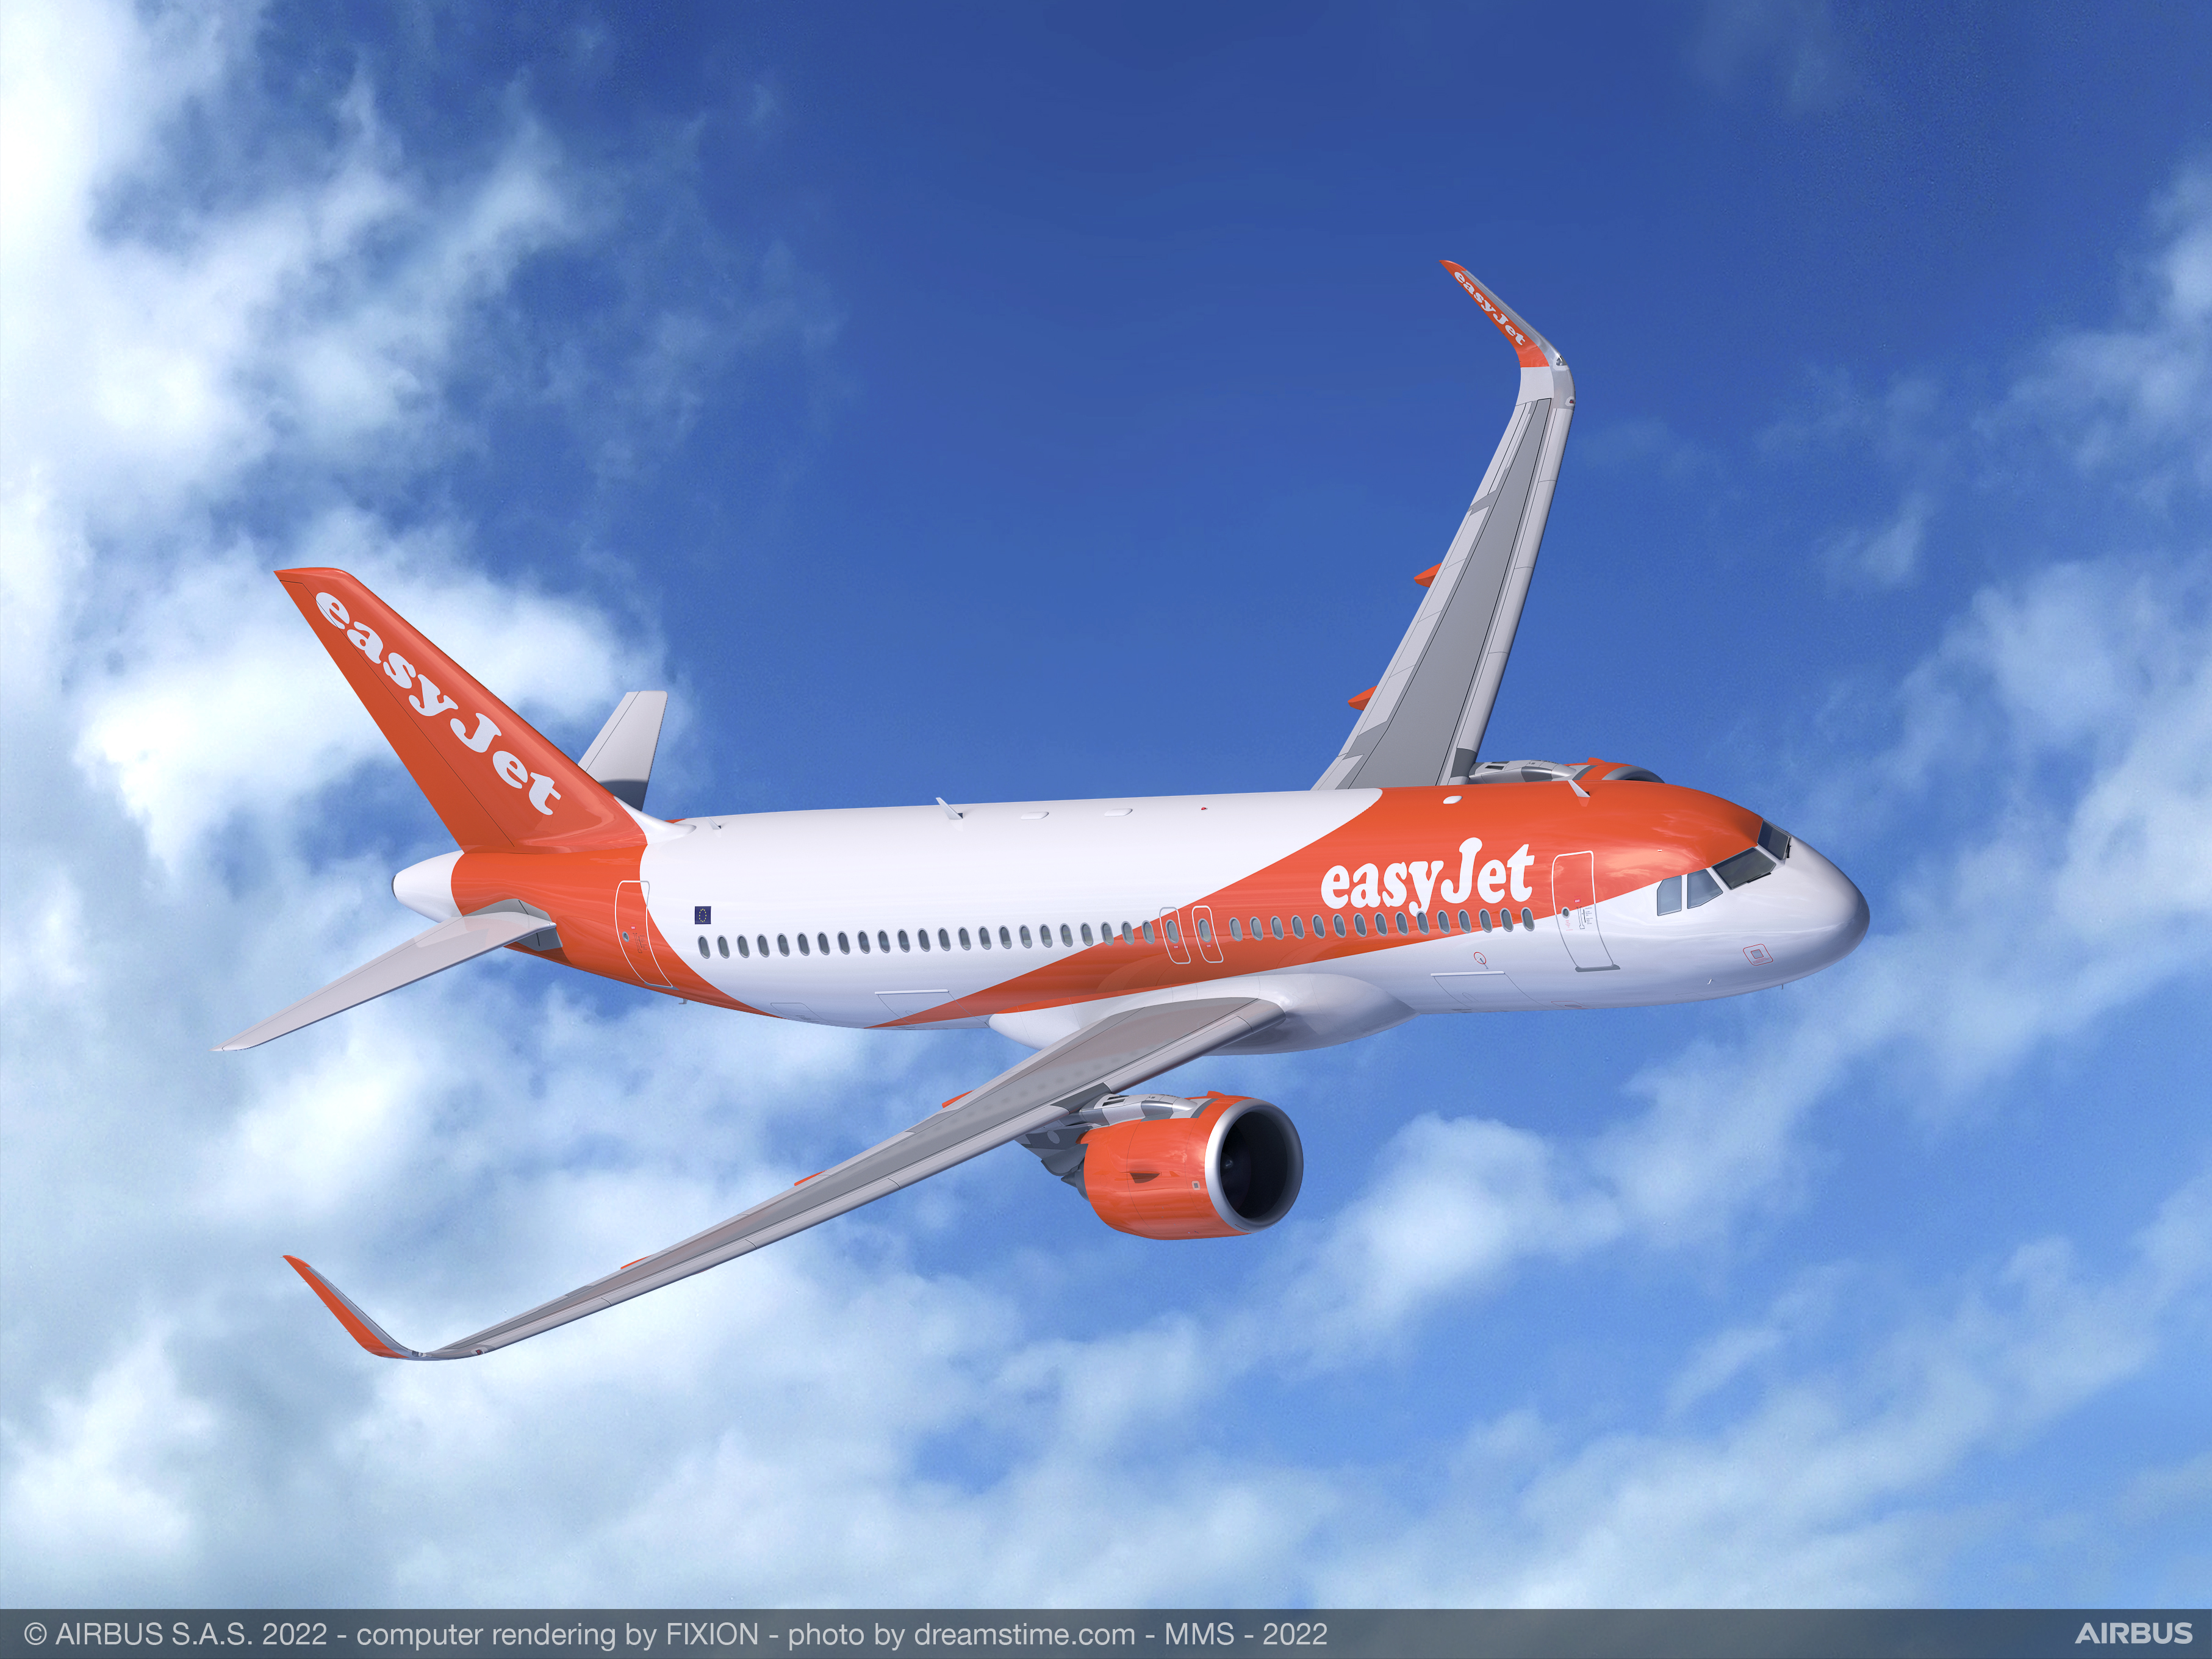 easyJet lays foundations for sustainability journey with fleet expansion